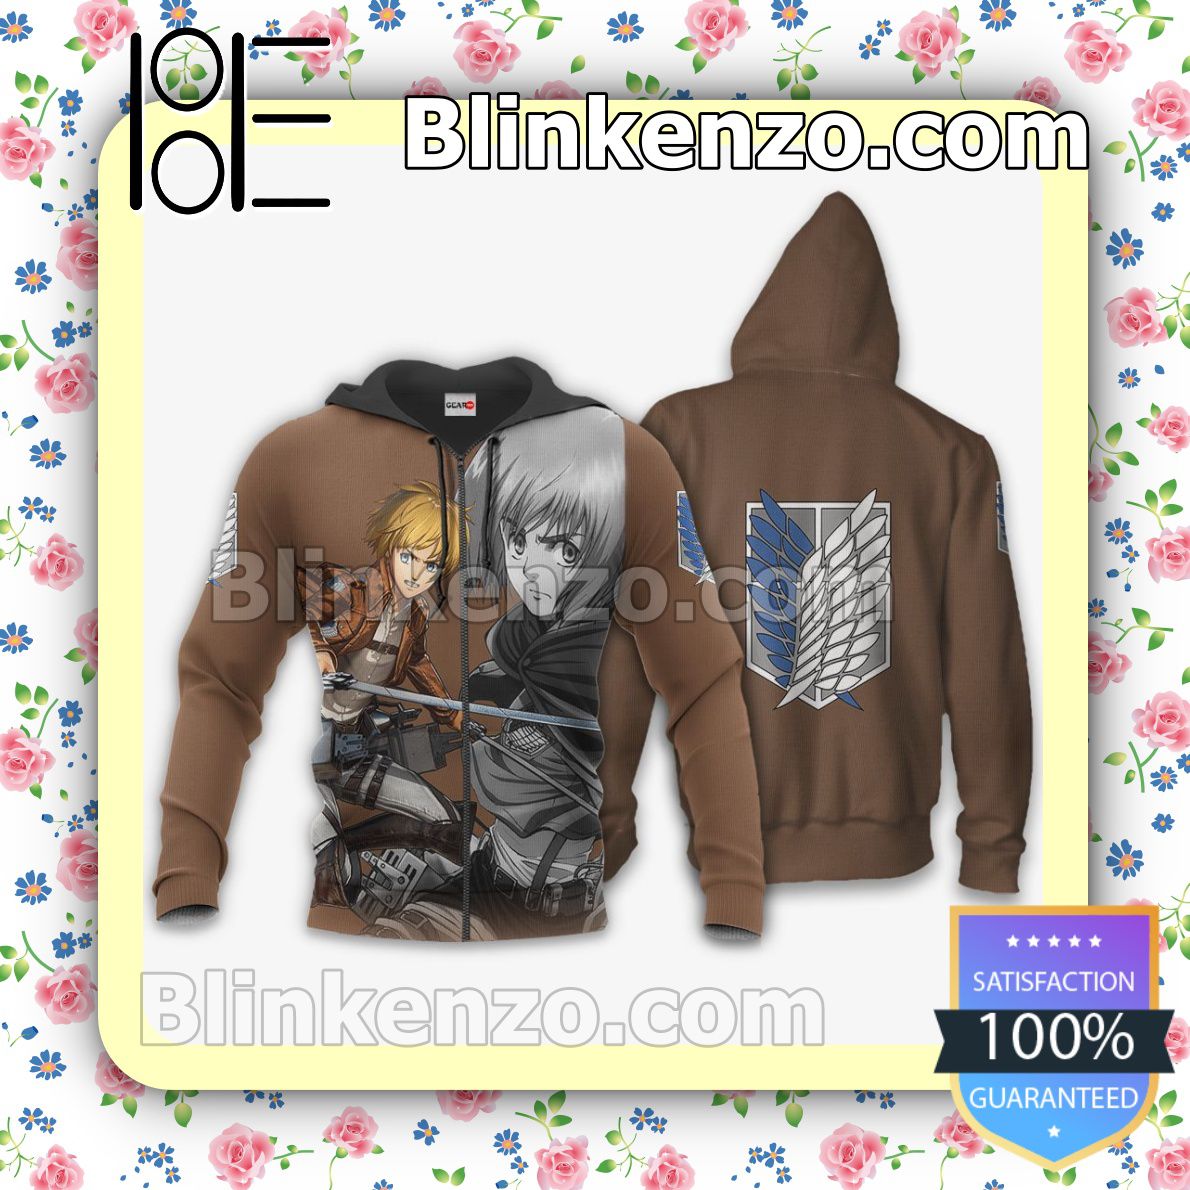 AOT Armin Arlert Attack On Titan Anime Personalized T-shirt, Hoodie, Long Sleeve, Bomber Jacket